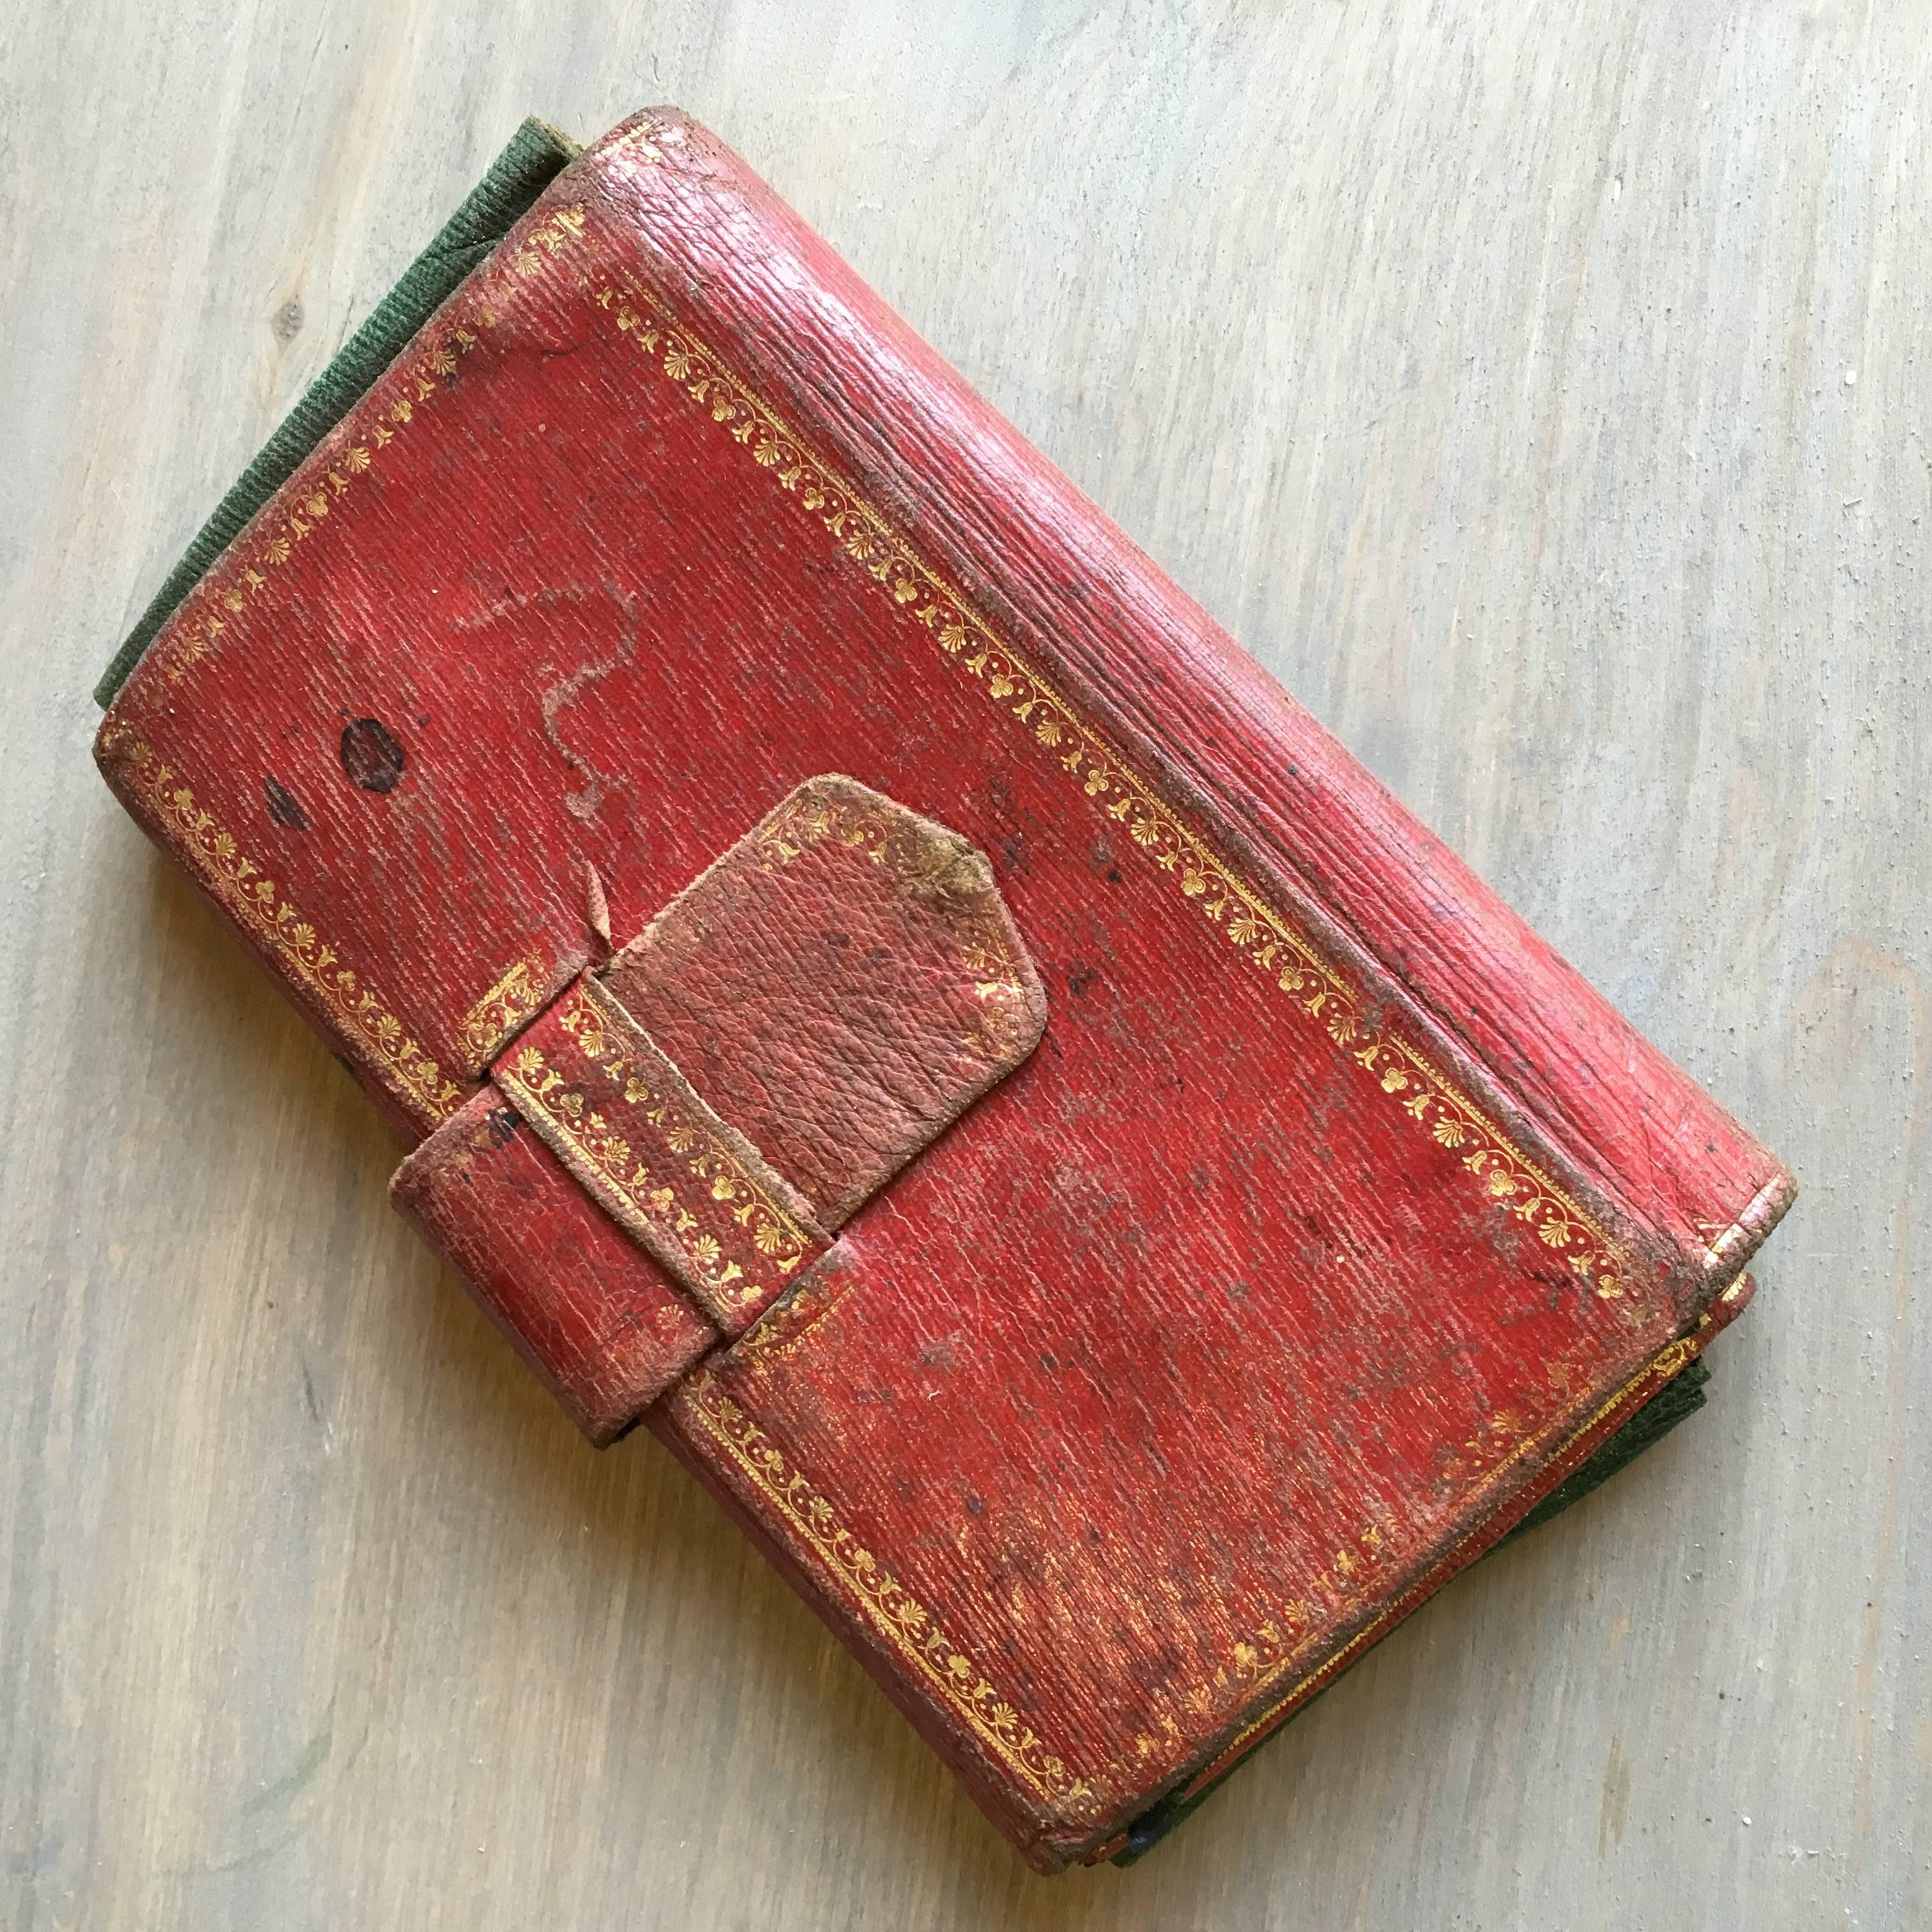 A charming 18th century letter pouch in red tooled leather with gilt decoration, circa 1760 with bright green leather interior. Nice desk accessory.